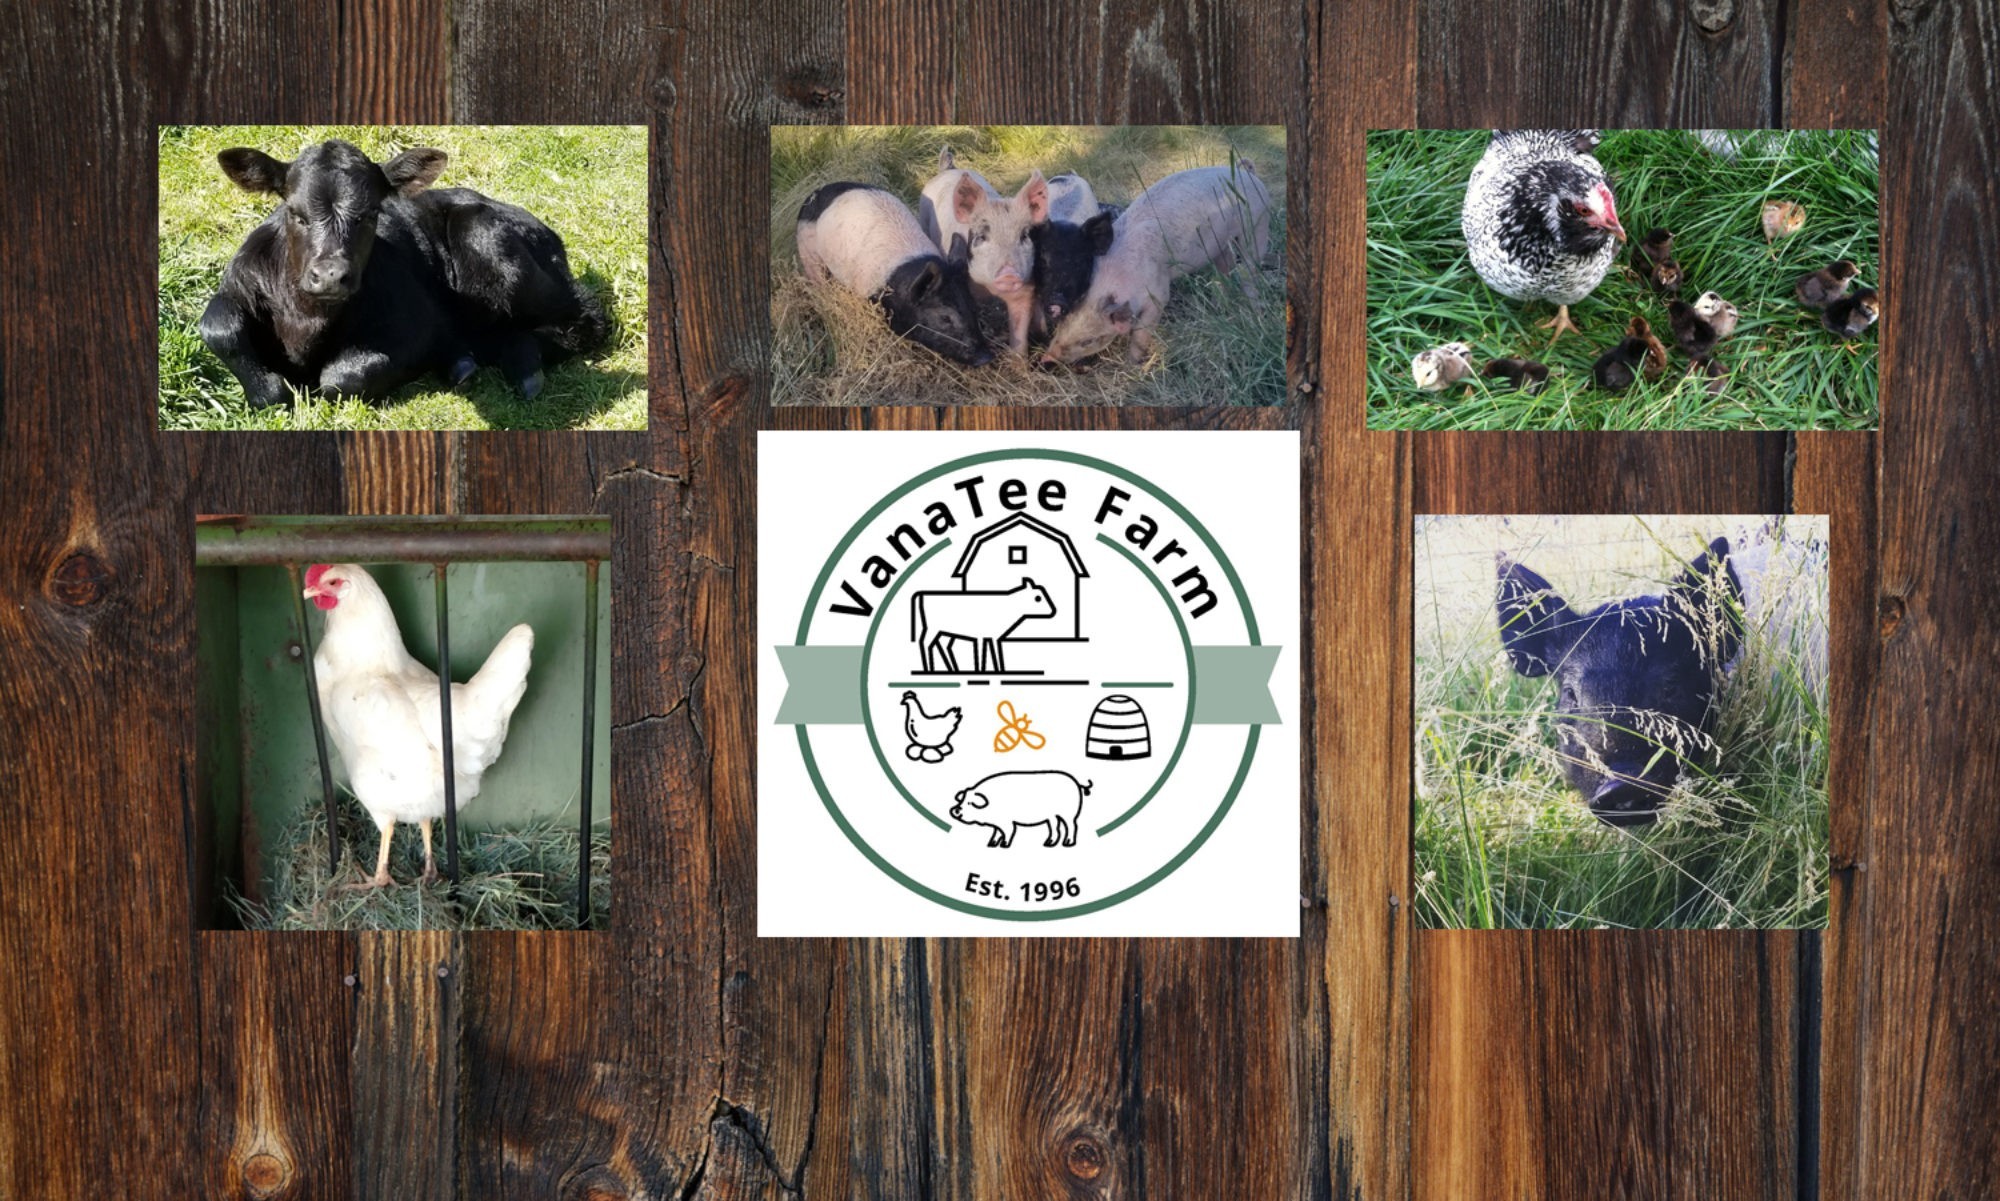 Barn wood background showing a collage of farm photos representing the chickens, pigs and cattle of VanaTee Farm.